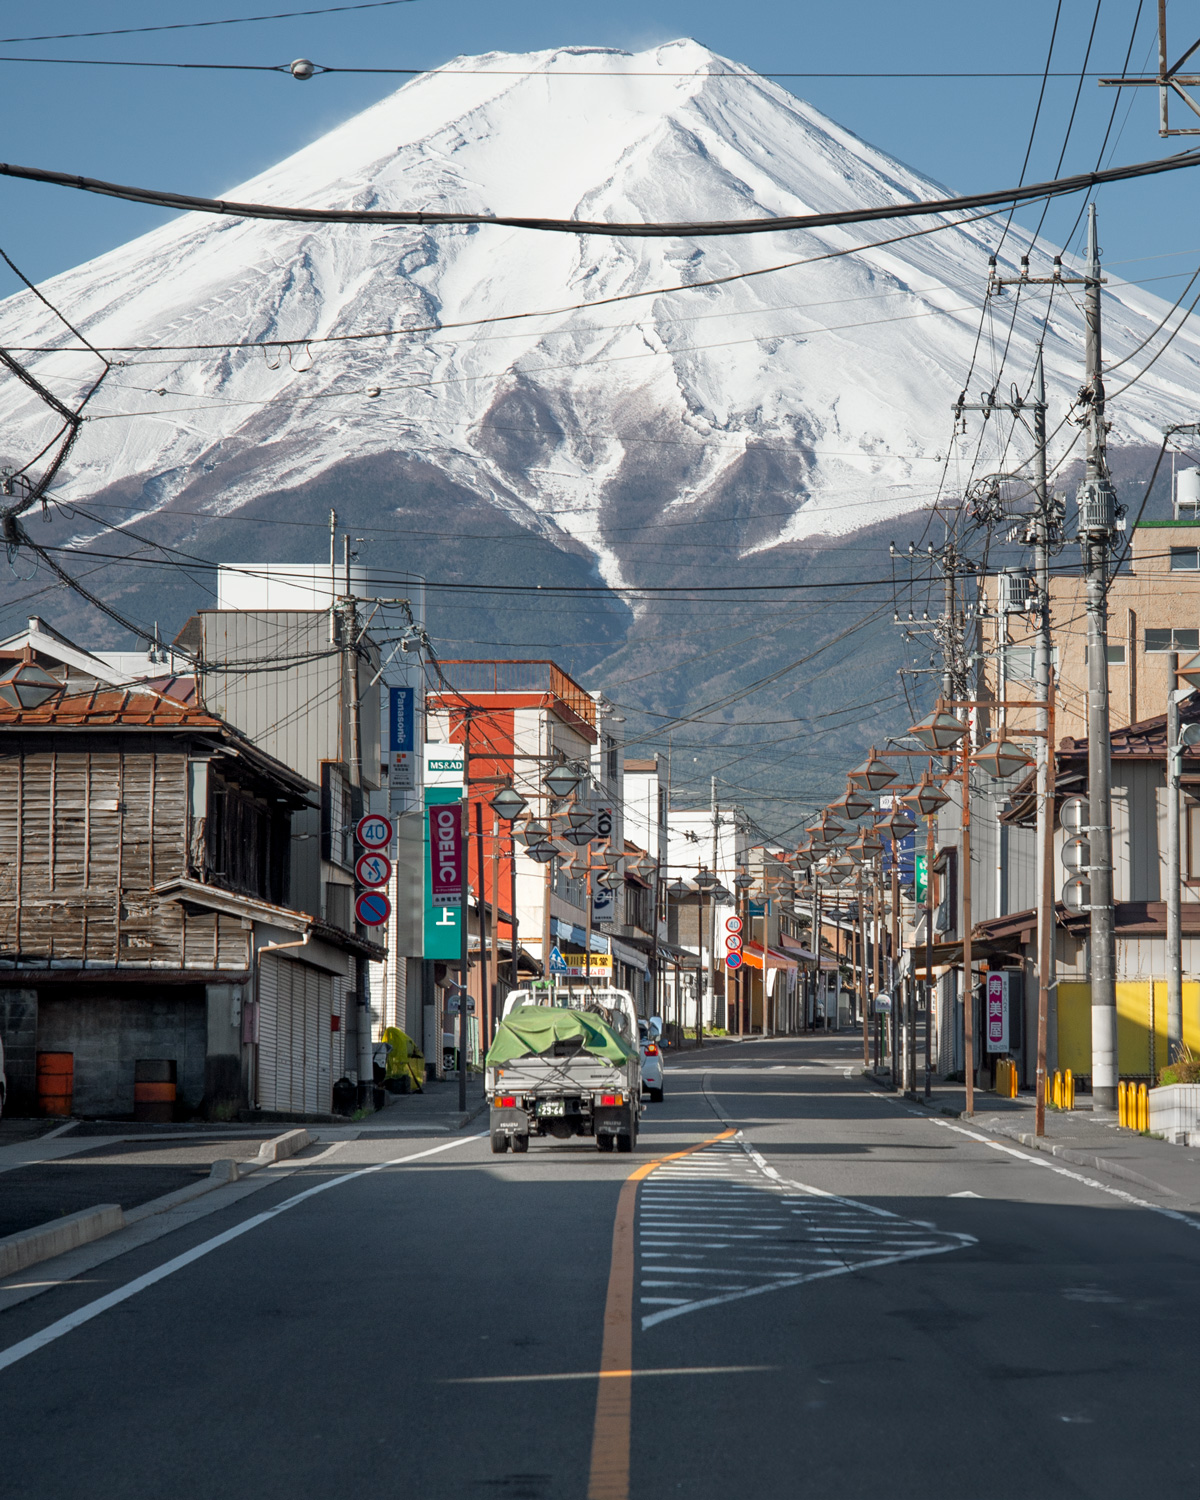 A clear view of Mt Fuji from the charming town of Fujiyoshida, Japan.